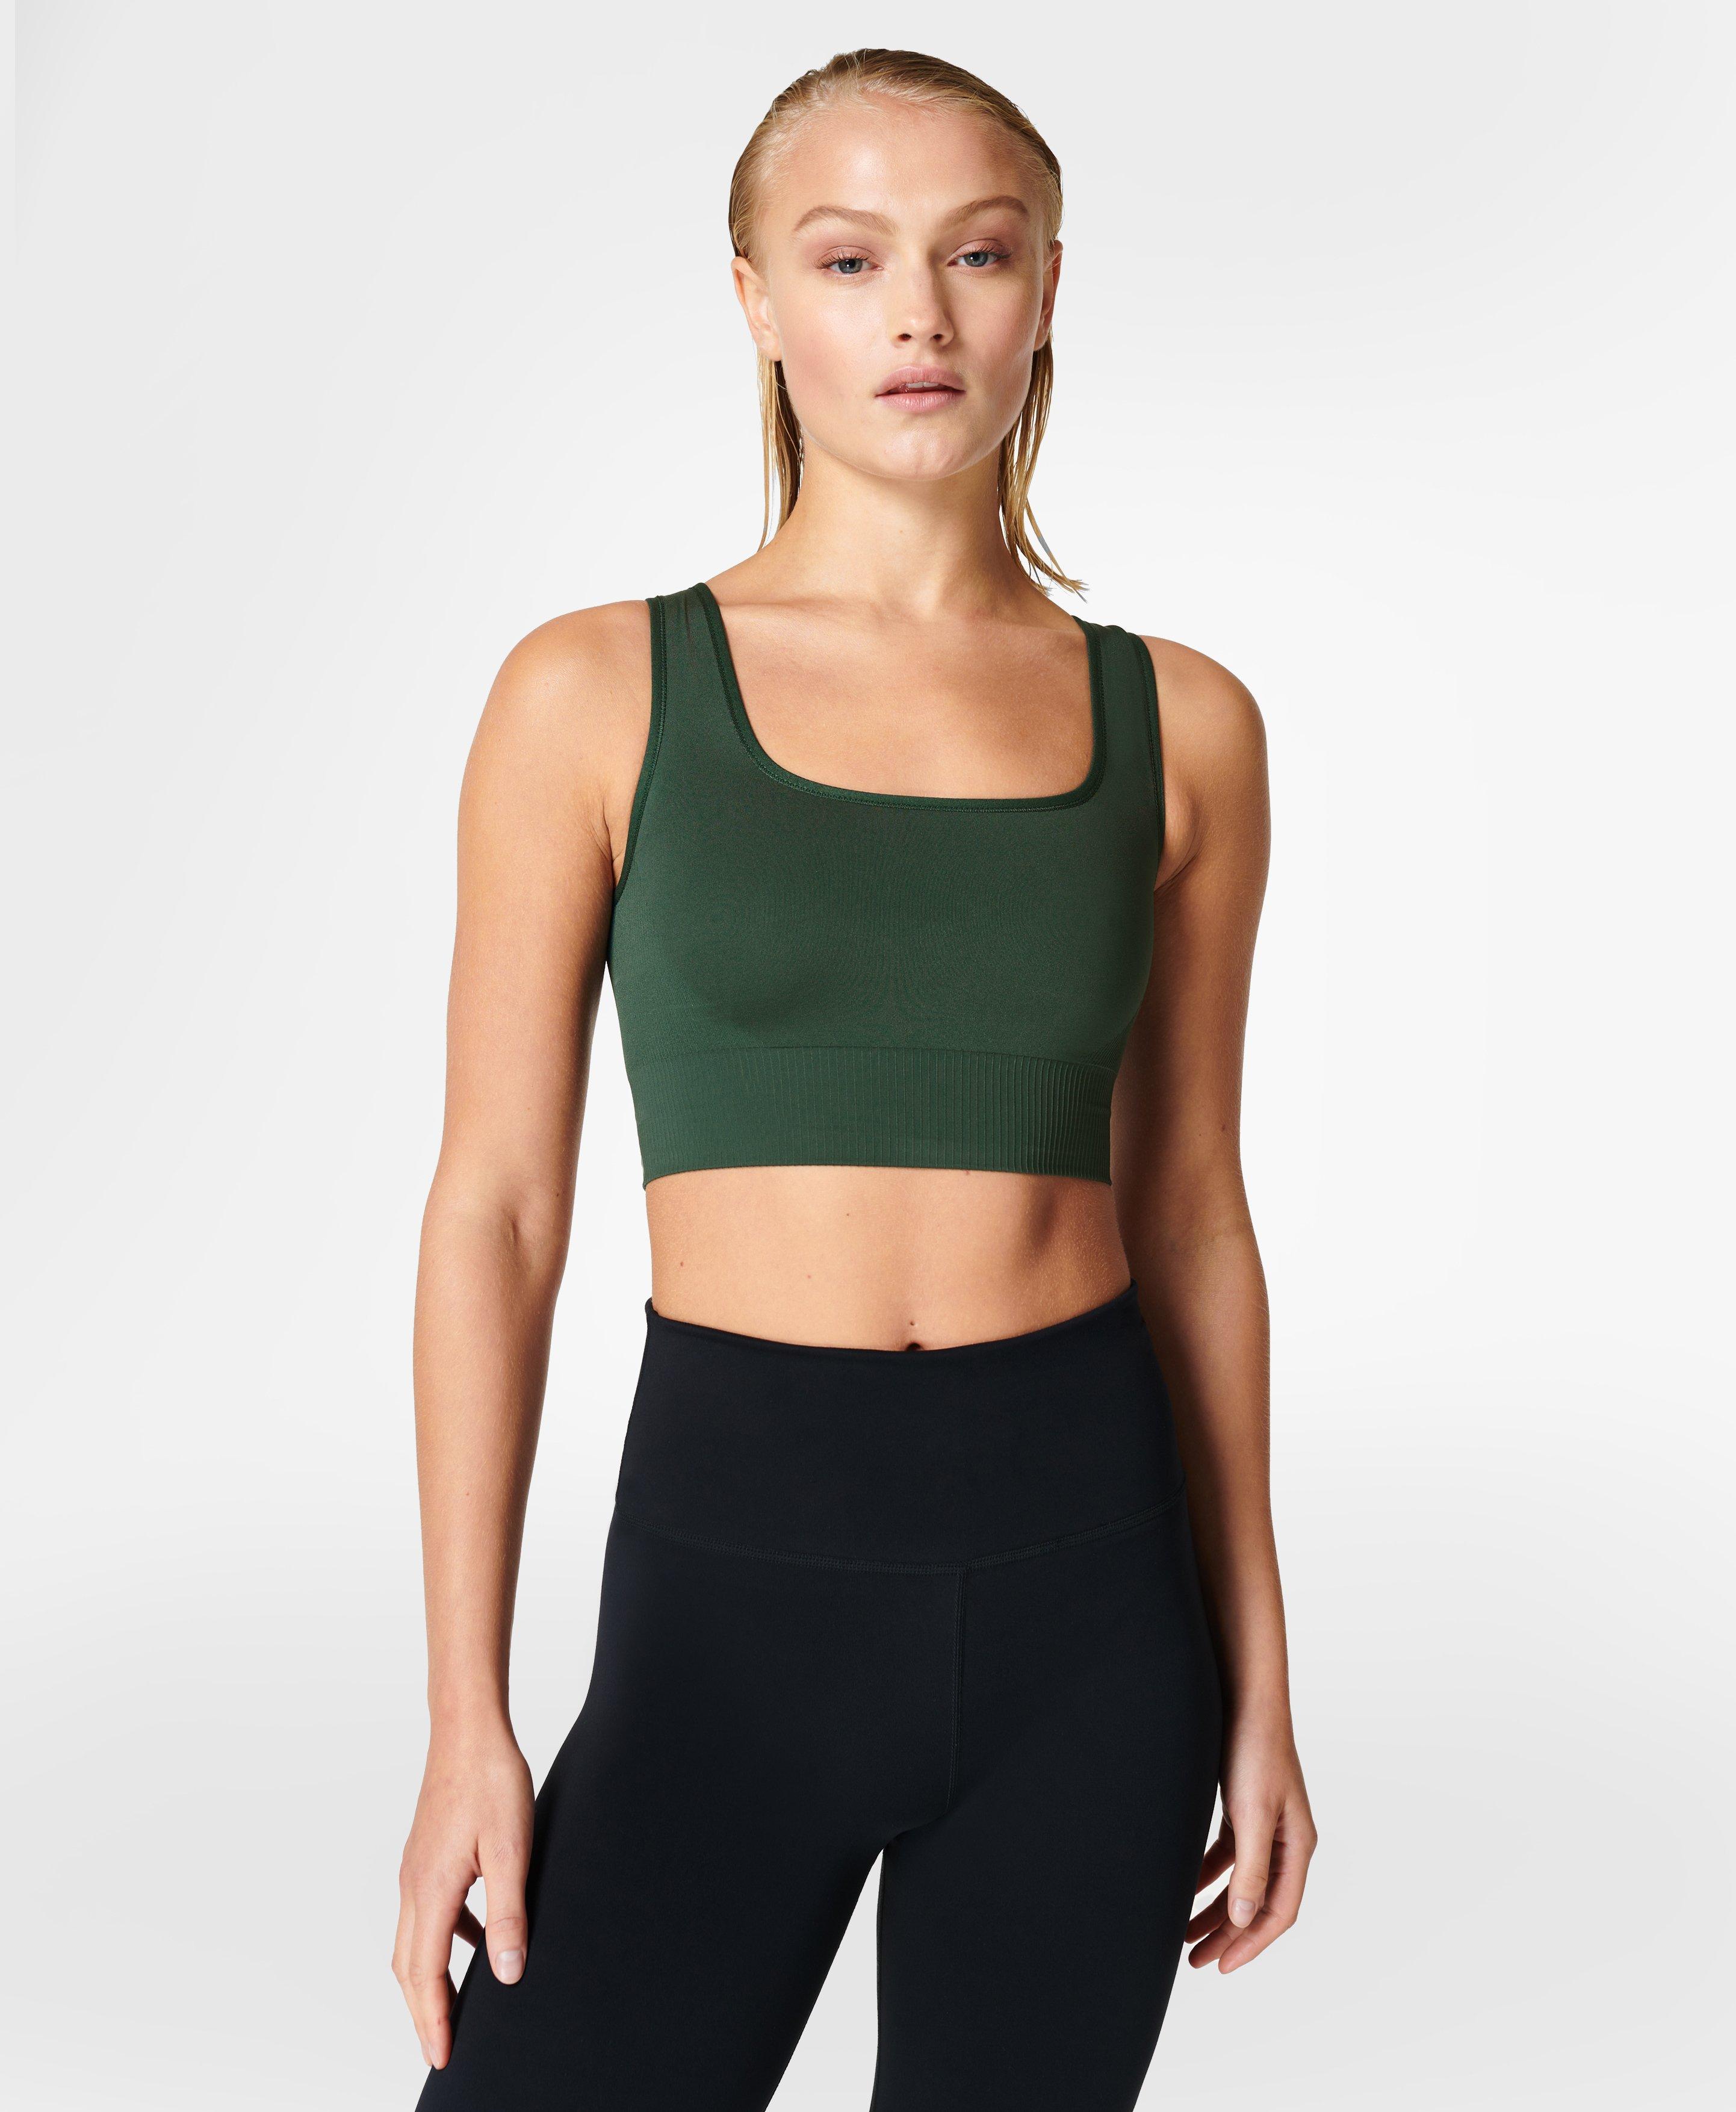 Sweaty Betty's Spring Sale is live: Get up to 60% off leggings, sports  bras, more from $5